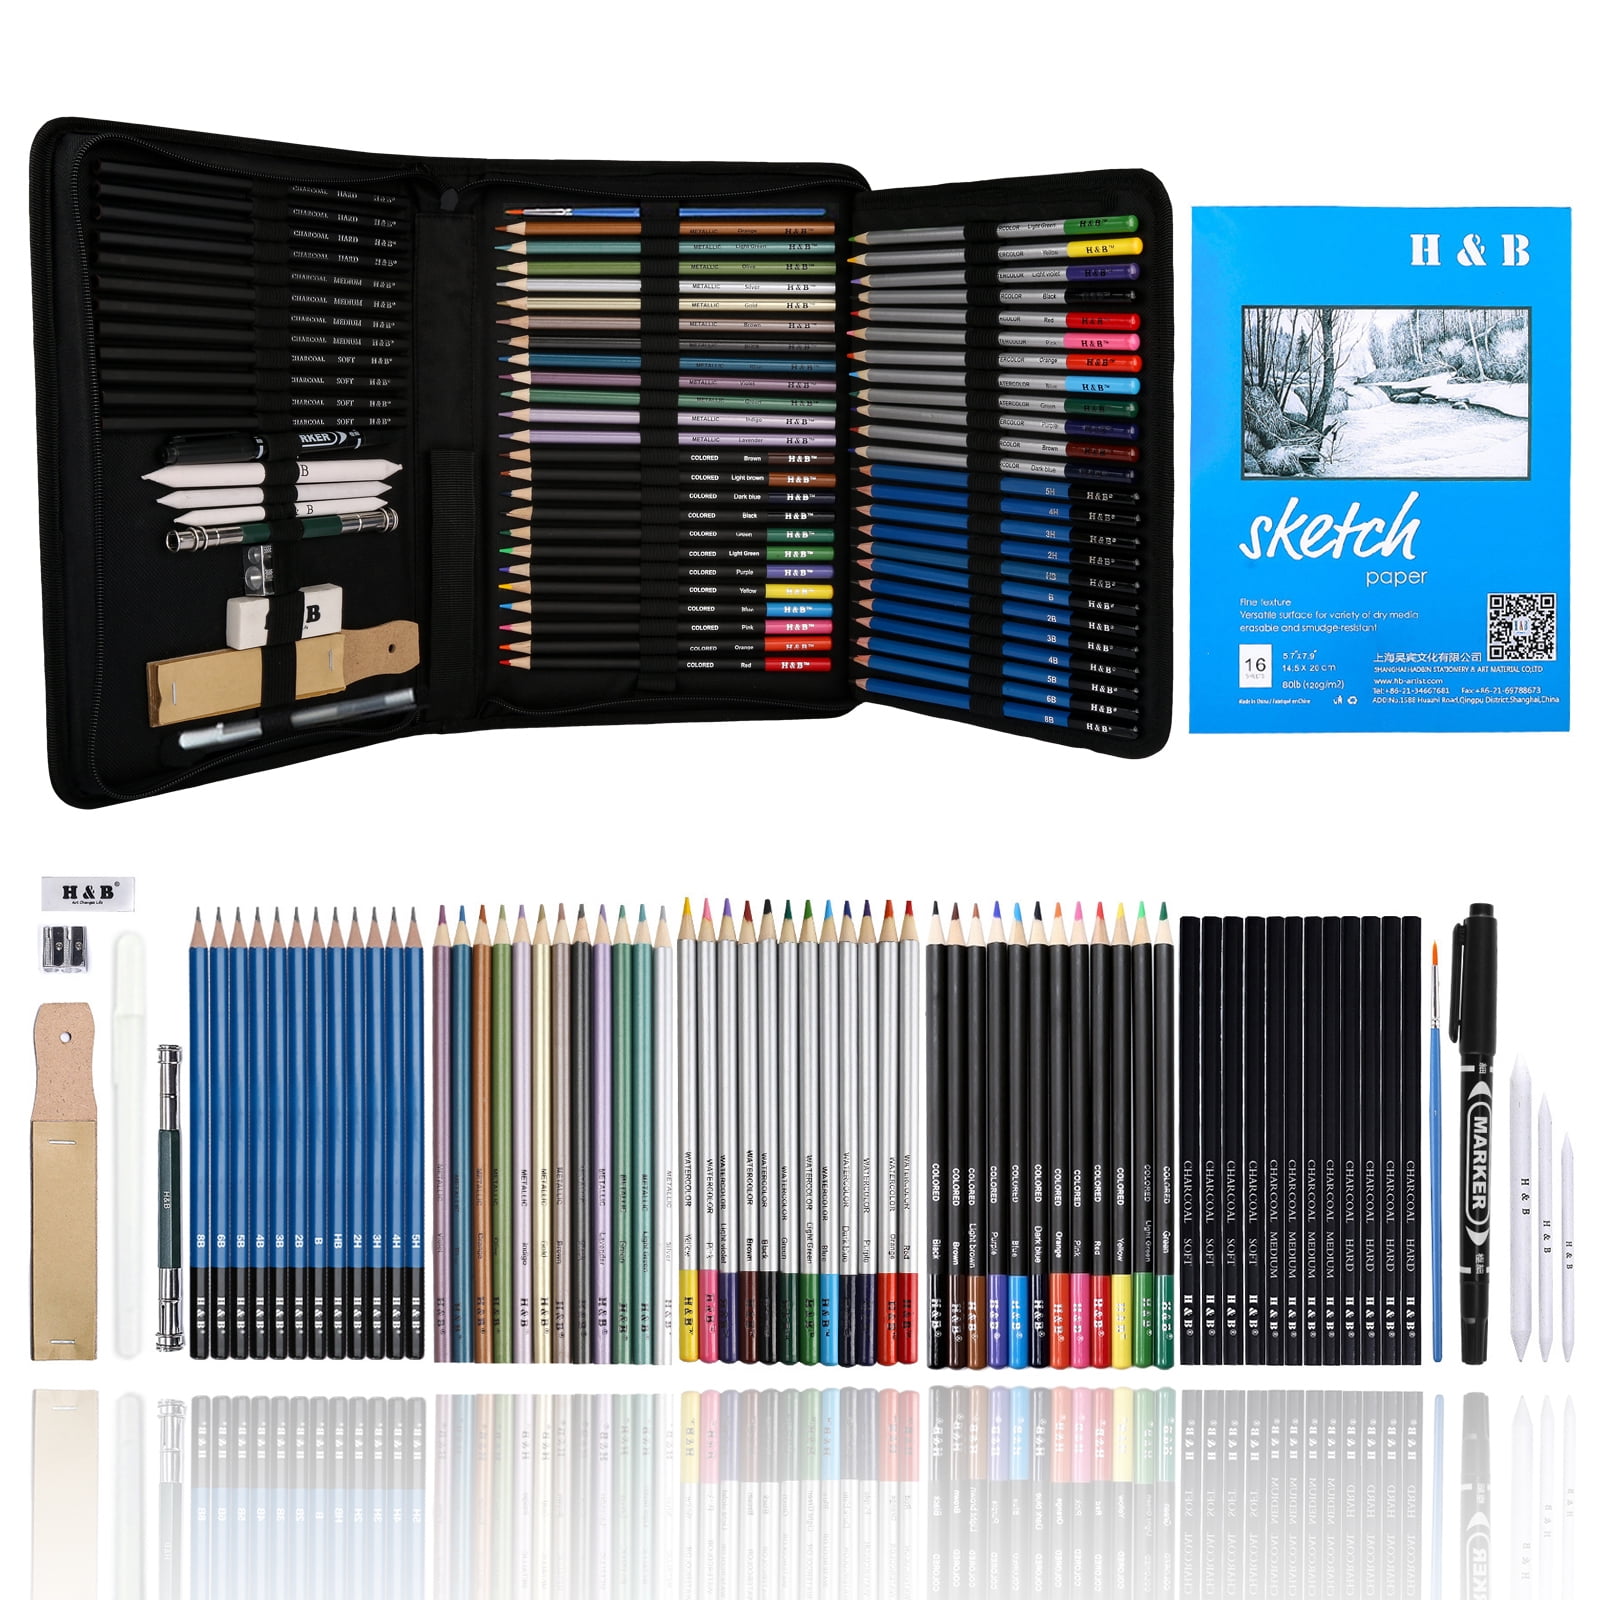 HTI Fairfax & Co 72 Piece Pencil Sketching Set with Portable Case | Premium  Quality Drawing Pencils Artists Drawing and Sketching Pencil Set with Case